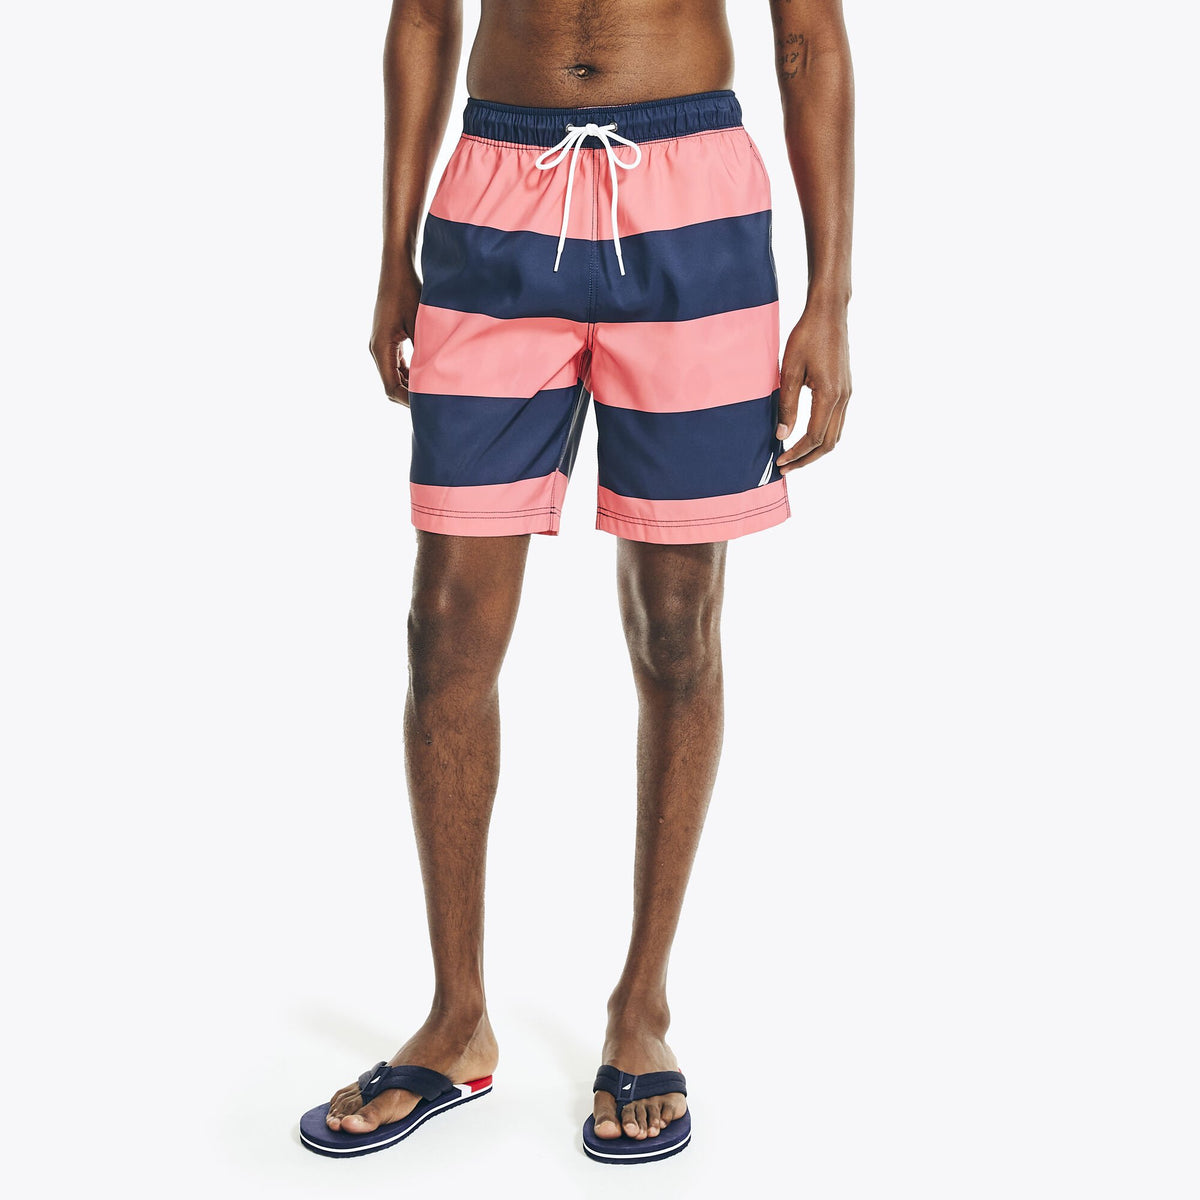 Nautica Men's Sustainably Crafted 8" Striped Swim Teaberry